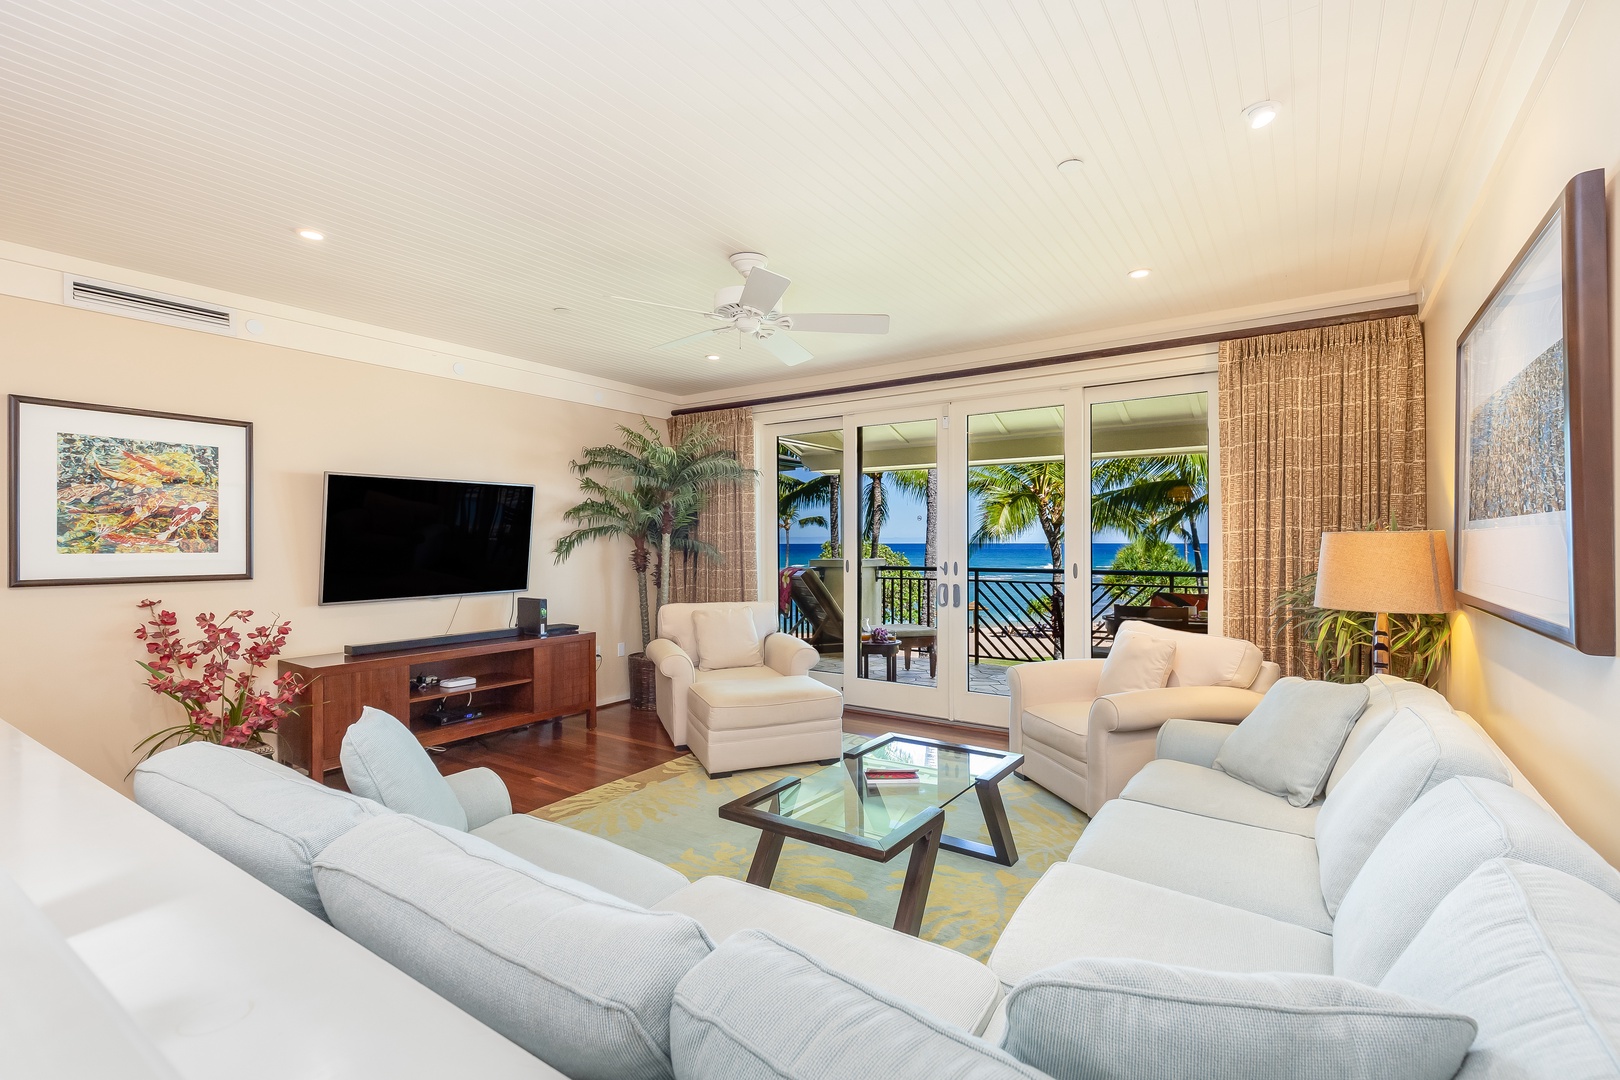 Kahuku Vacation Rentals, Turtle Bay Villas 304 - comfortable space for up to 10 guests